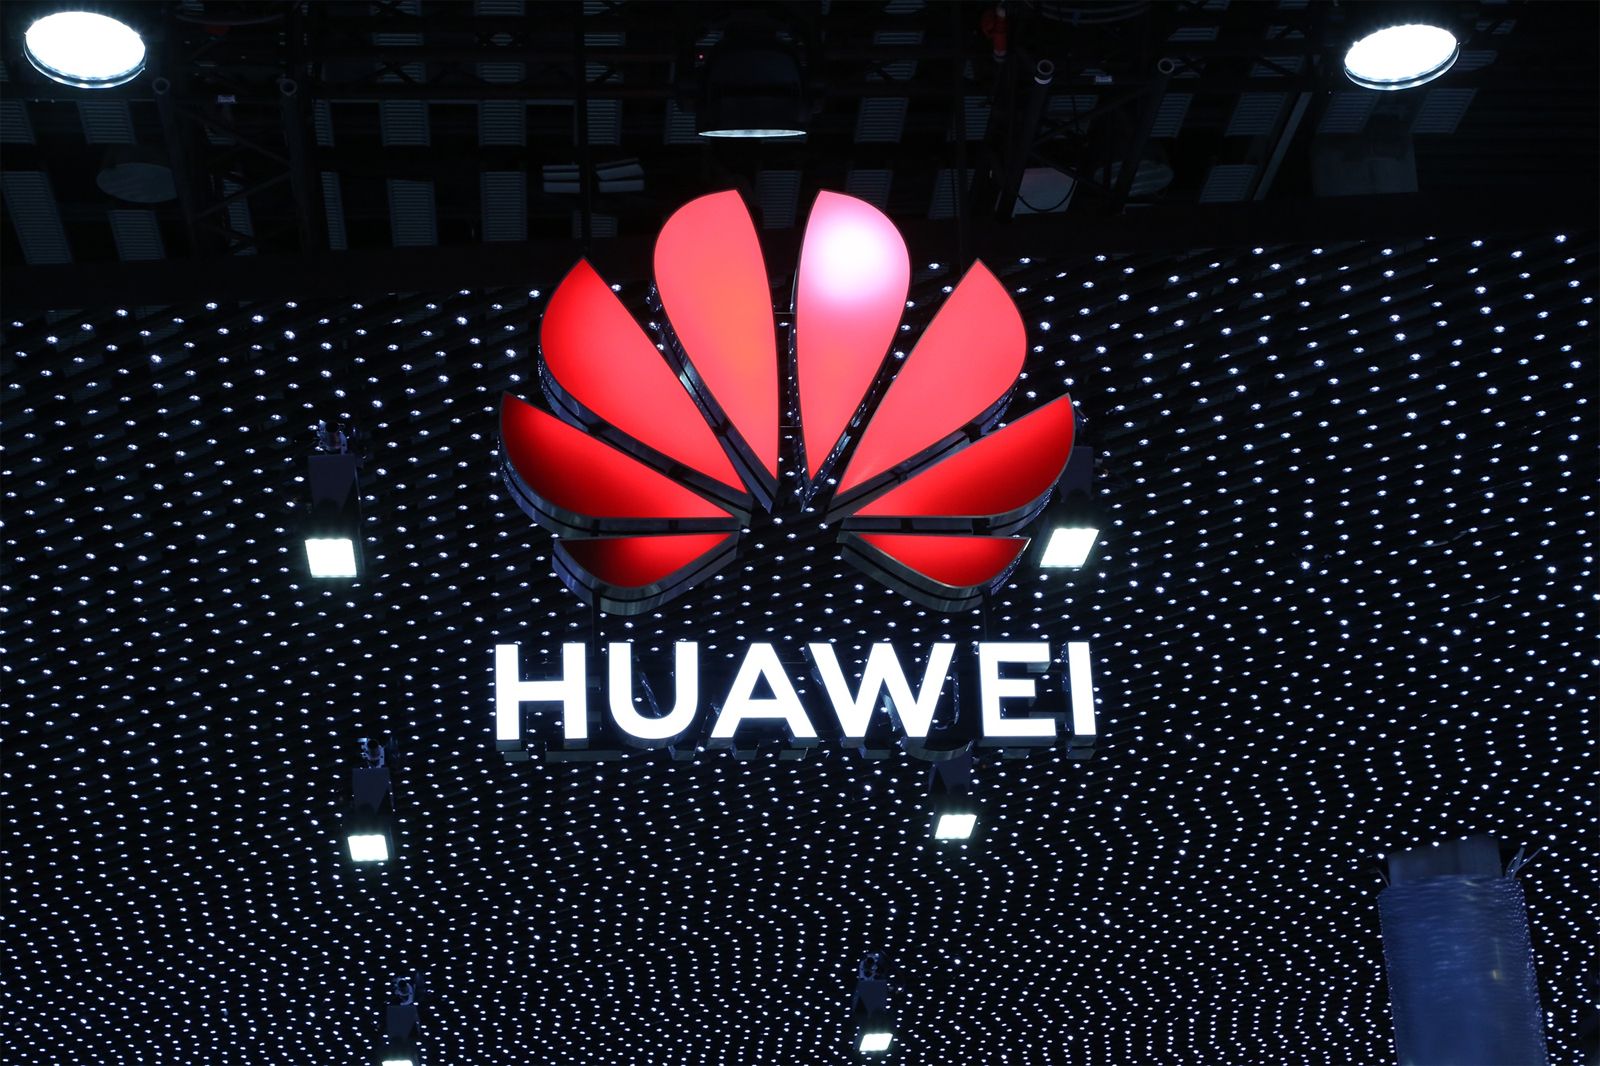 Upcoming Huawei phone set to introduce an under-display front camera photo 1